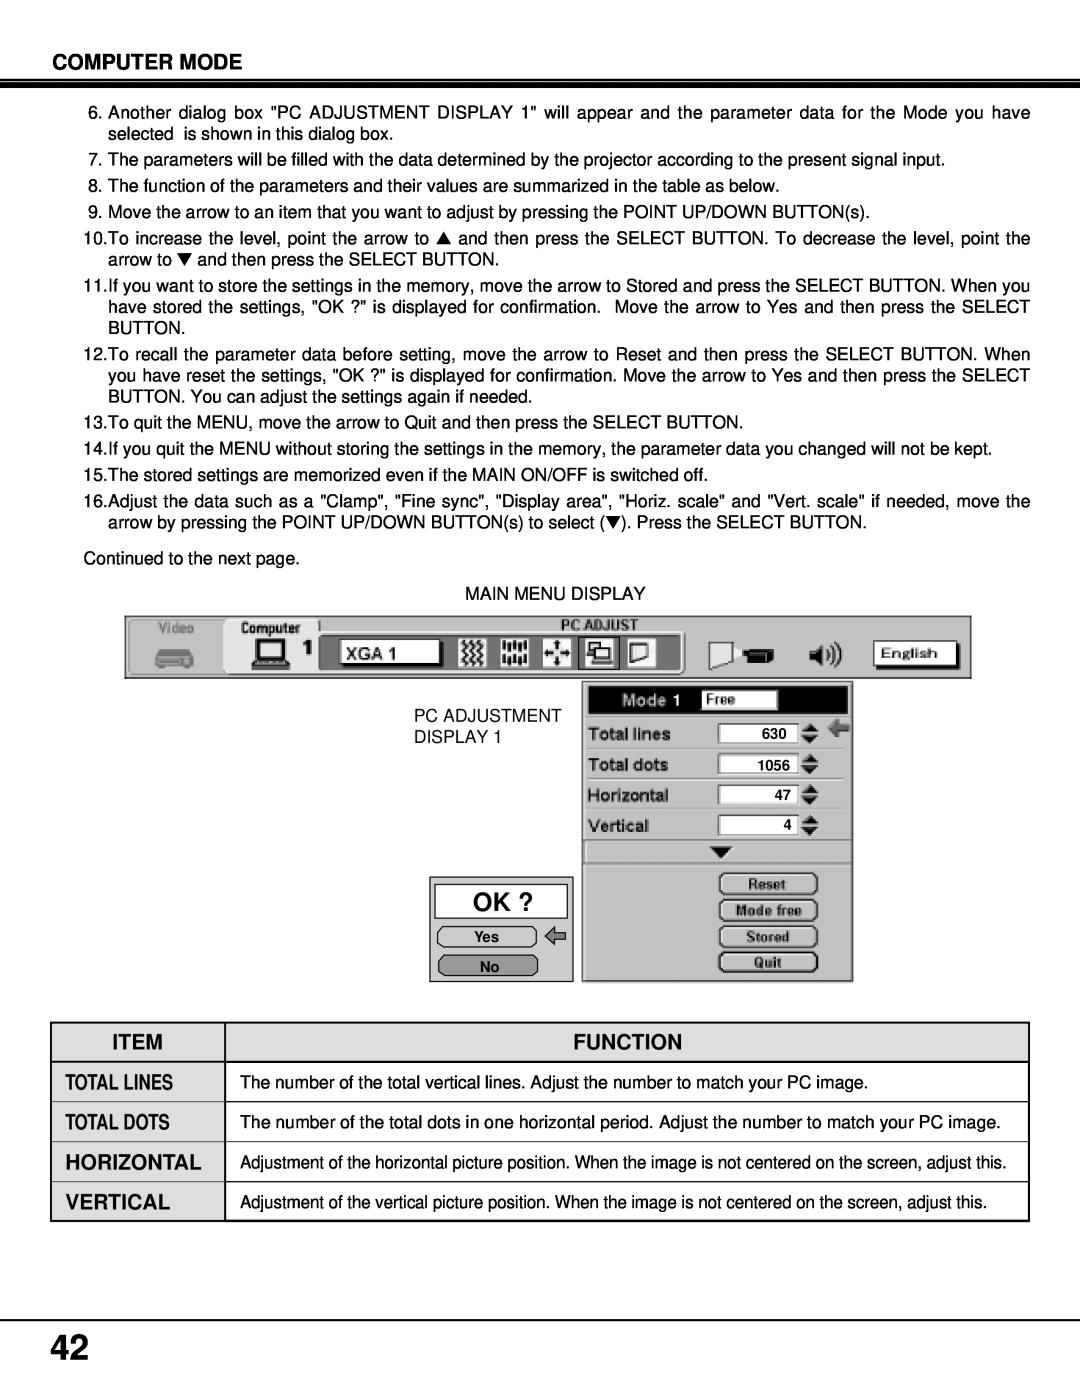 BOXLIGHT MP-37t manual Computer Mode, Function, Total Lines, Total Dots, Horizontal, Vertical 